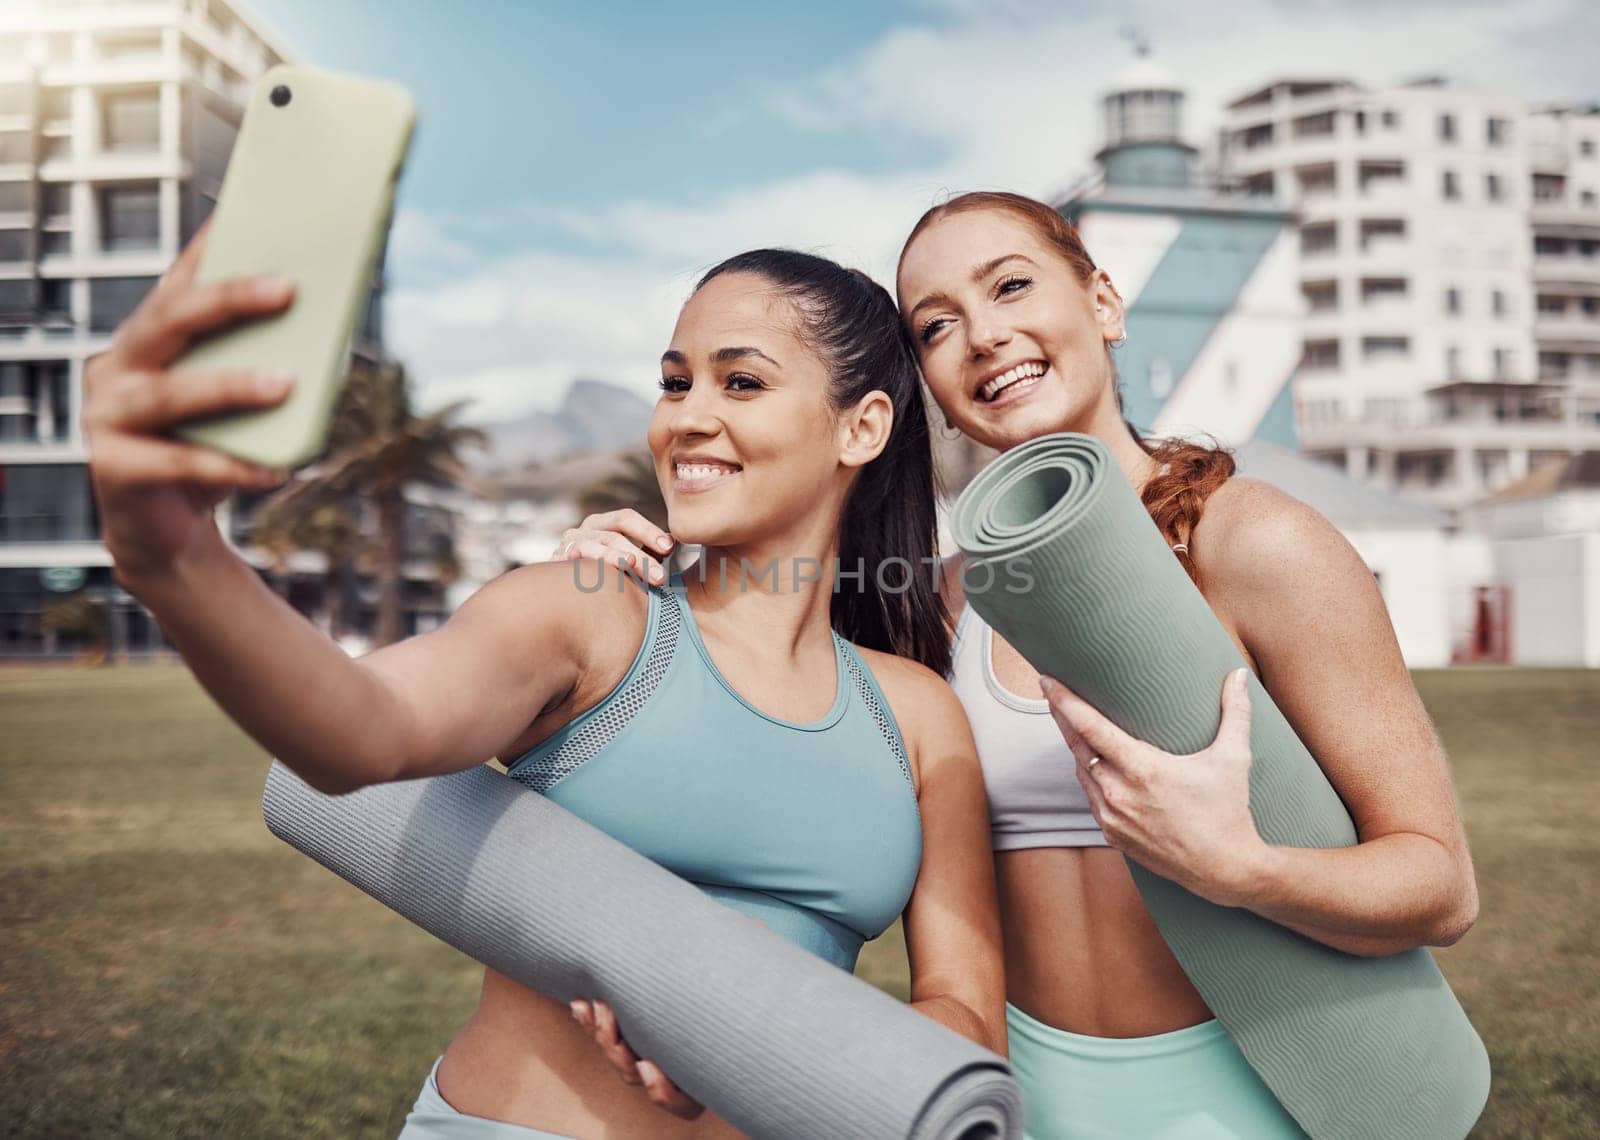 Yoga, fitness and selfie with woman friends in the park together for mental health exercise. Pilates, social media and training with a female and friend outside on a grass field for a summer workout by YuriArcurs